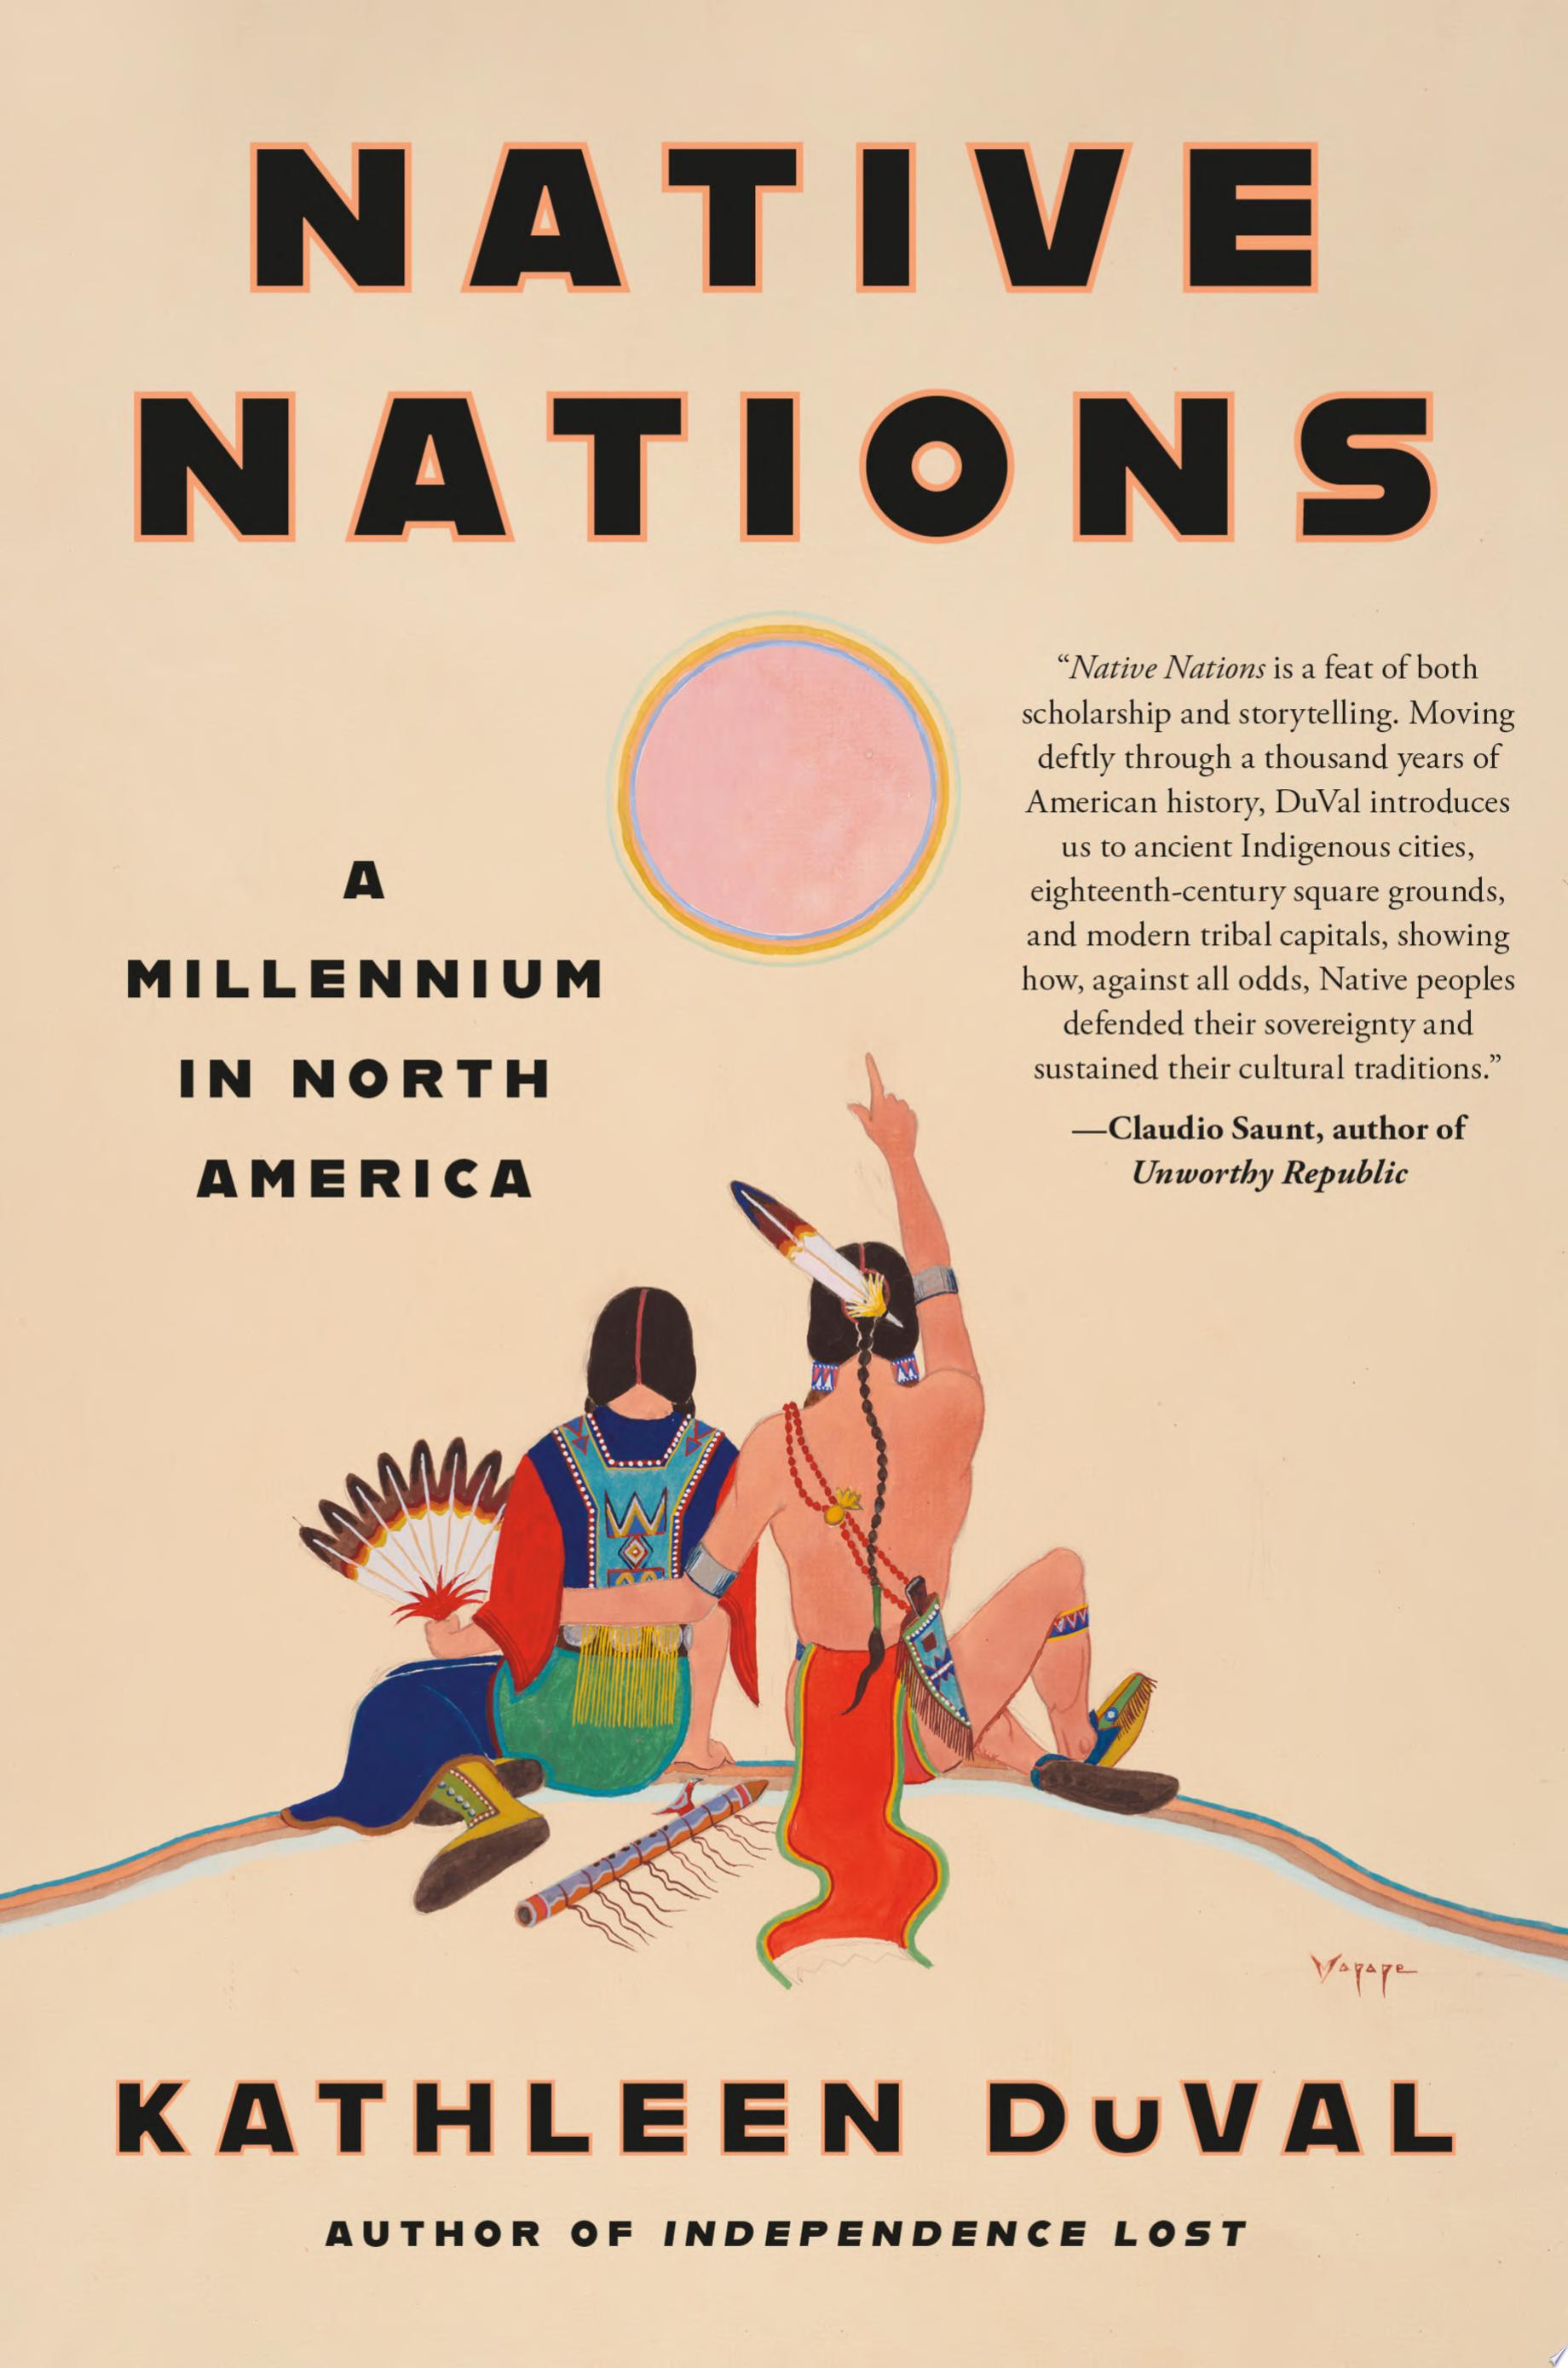 Image for "Native Nations"